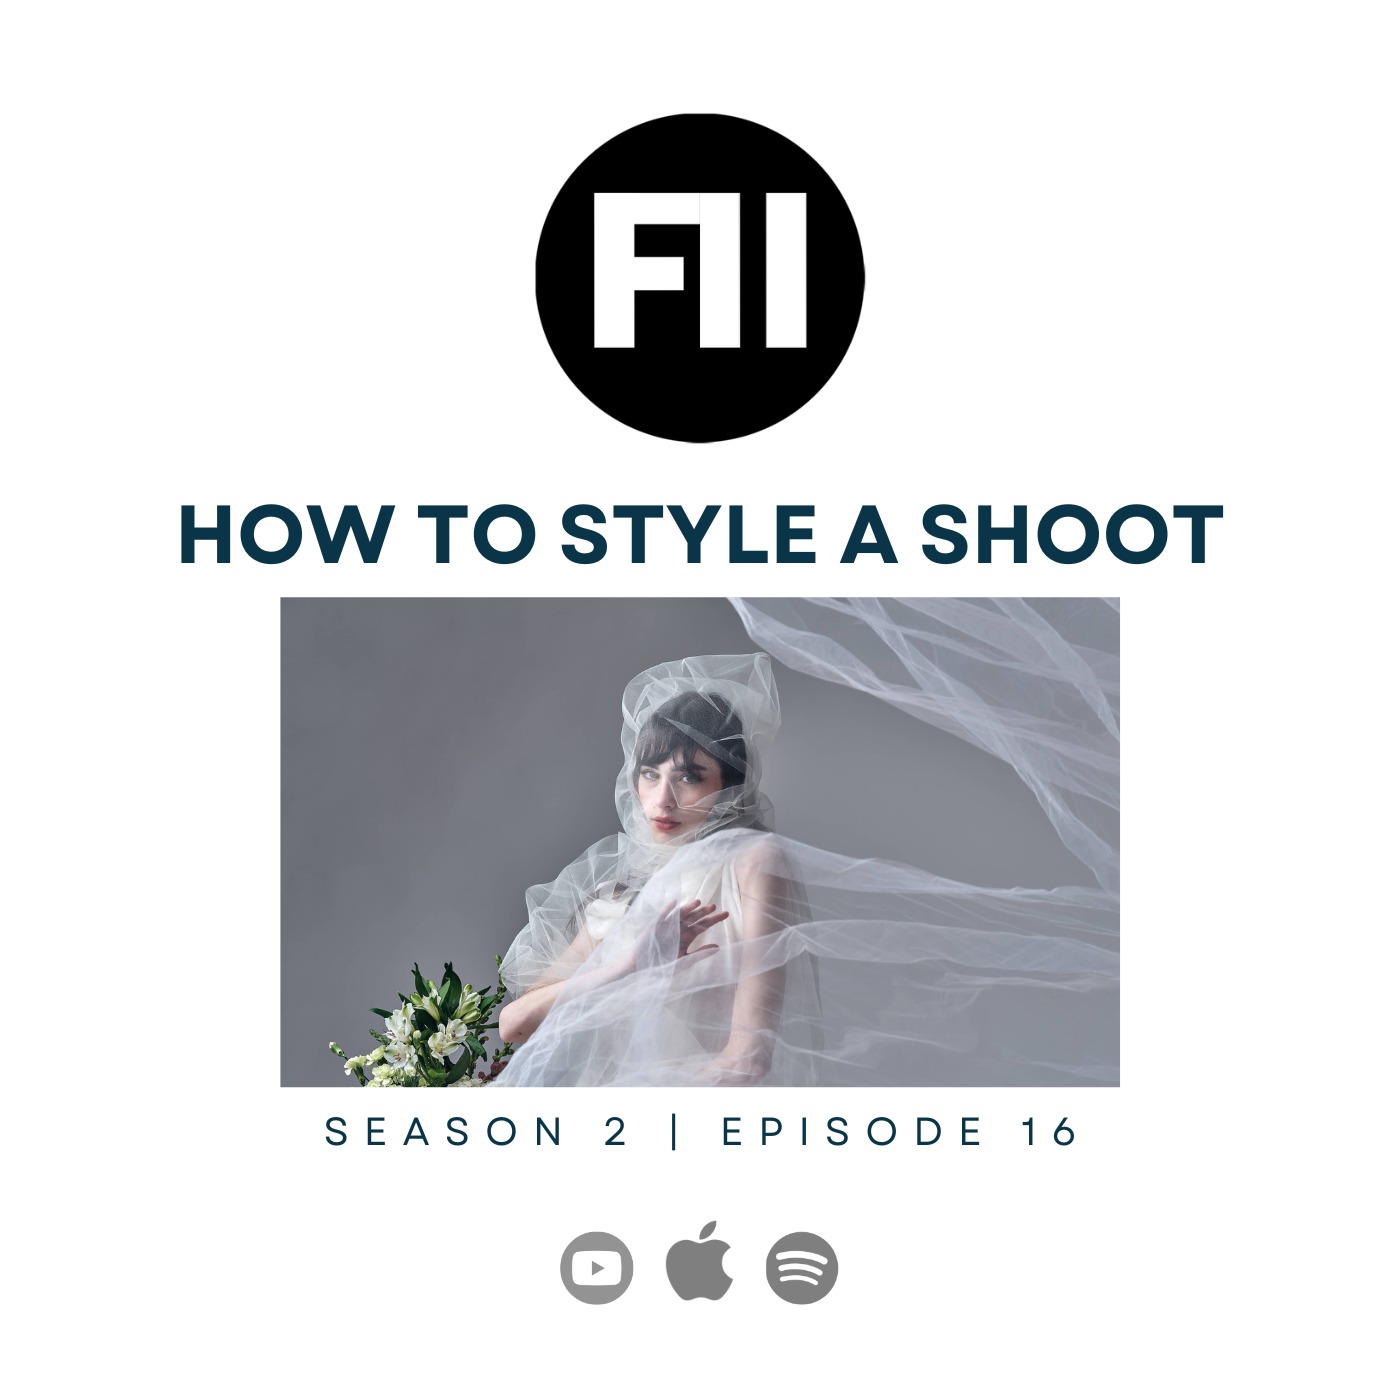 How To Style a Shoot (S02E16)